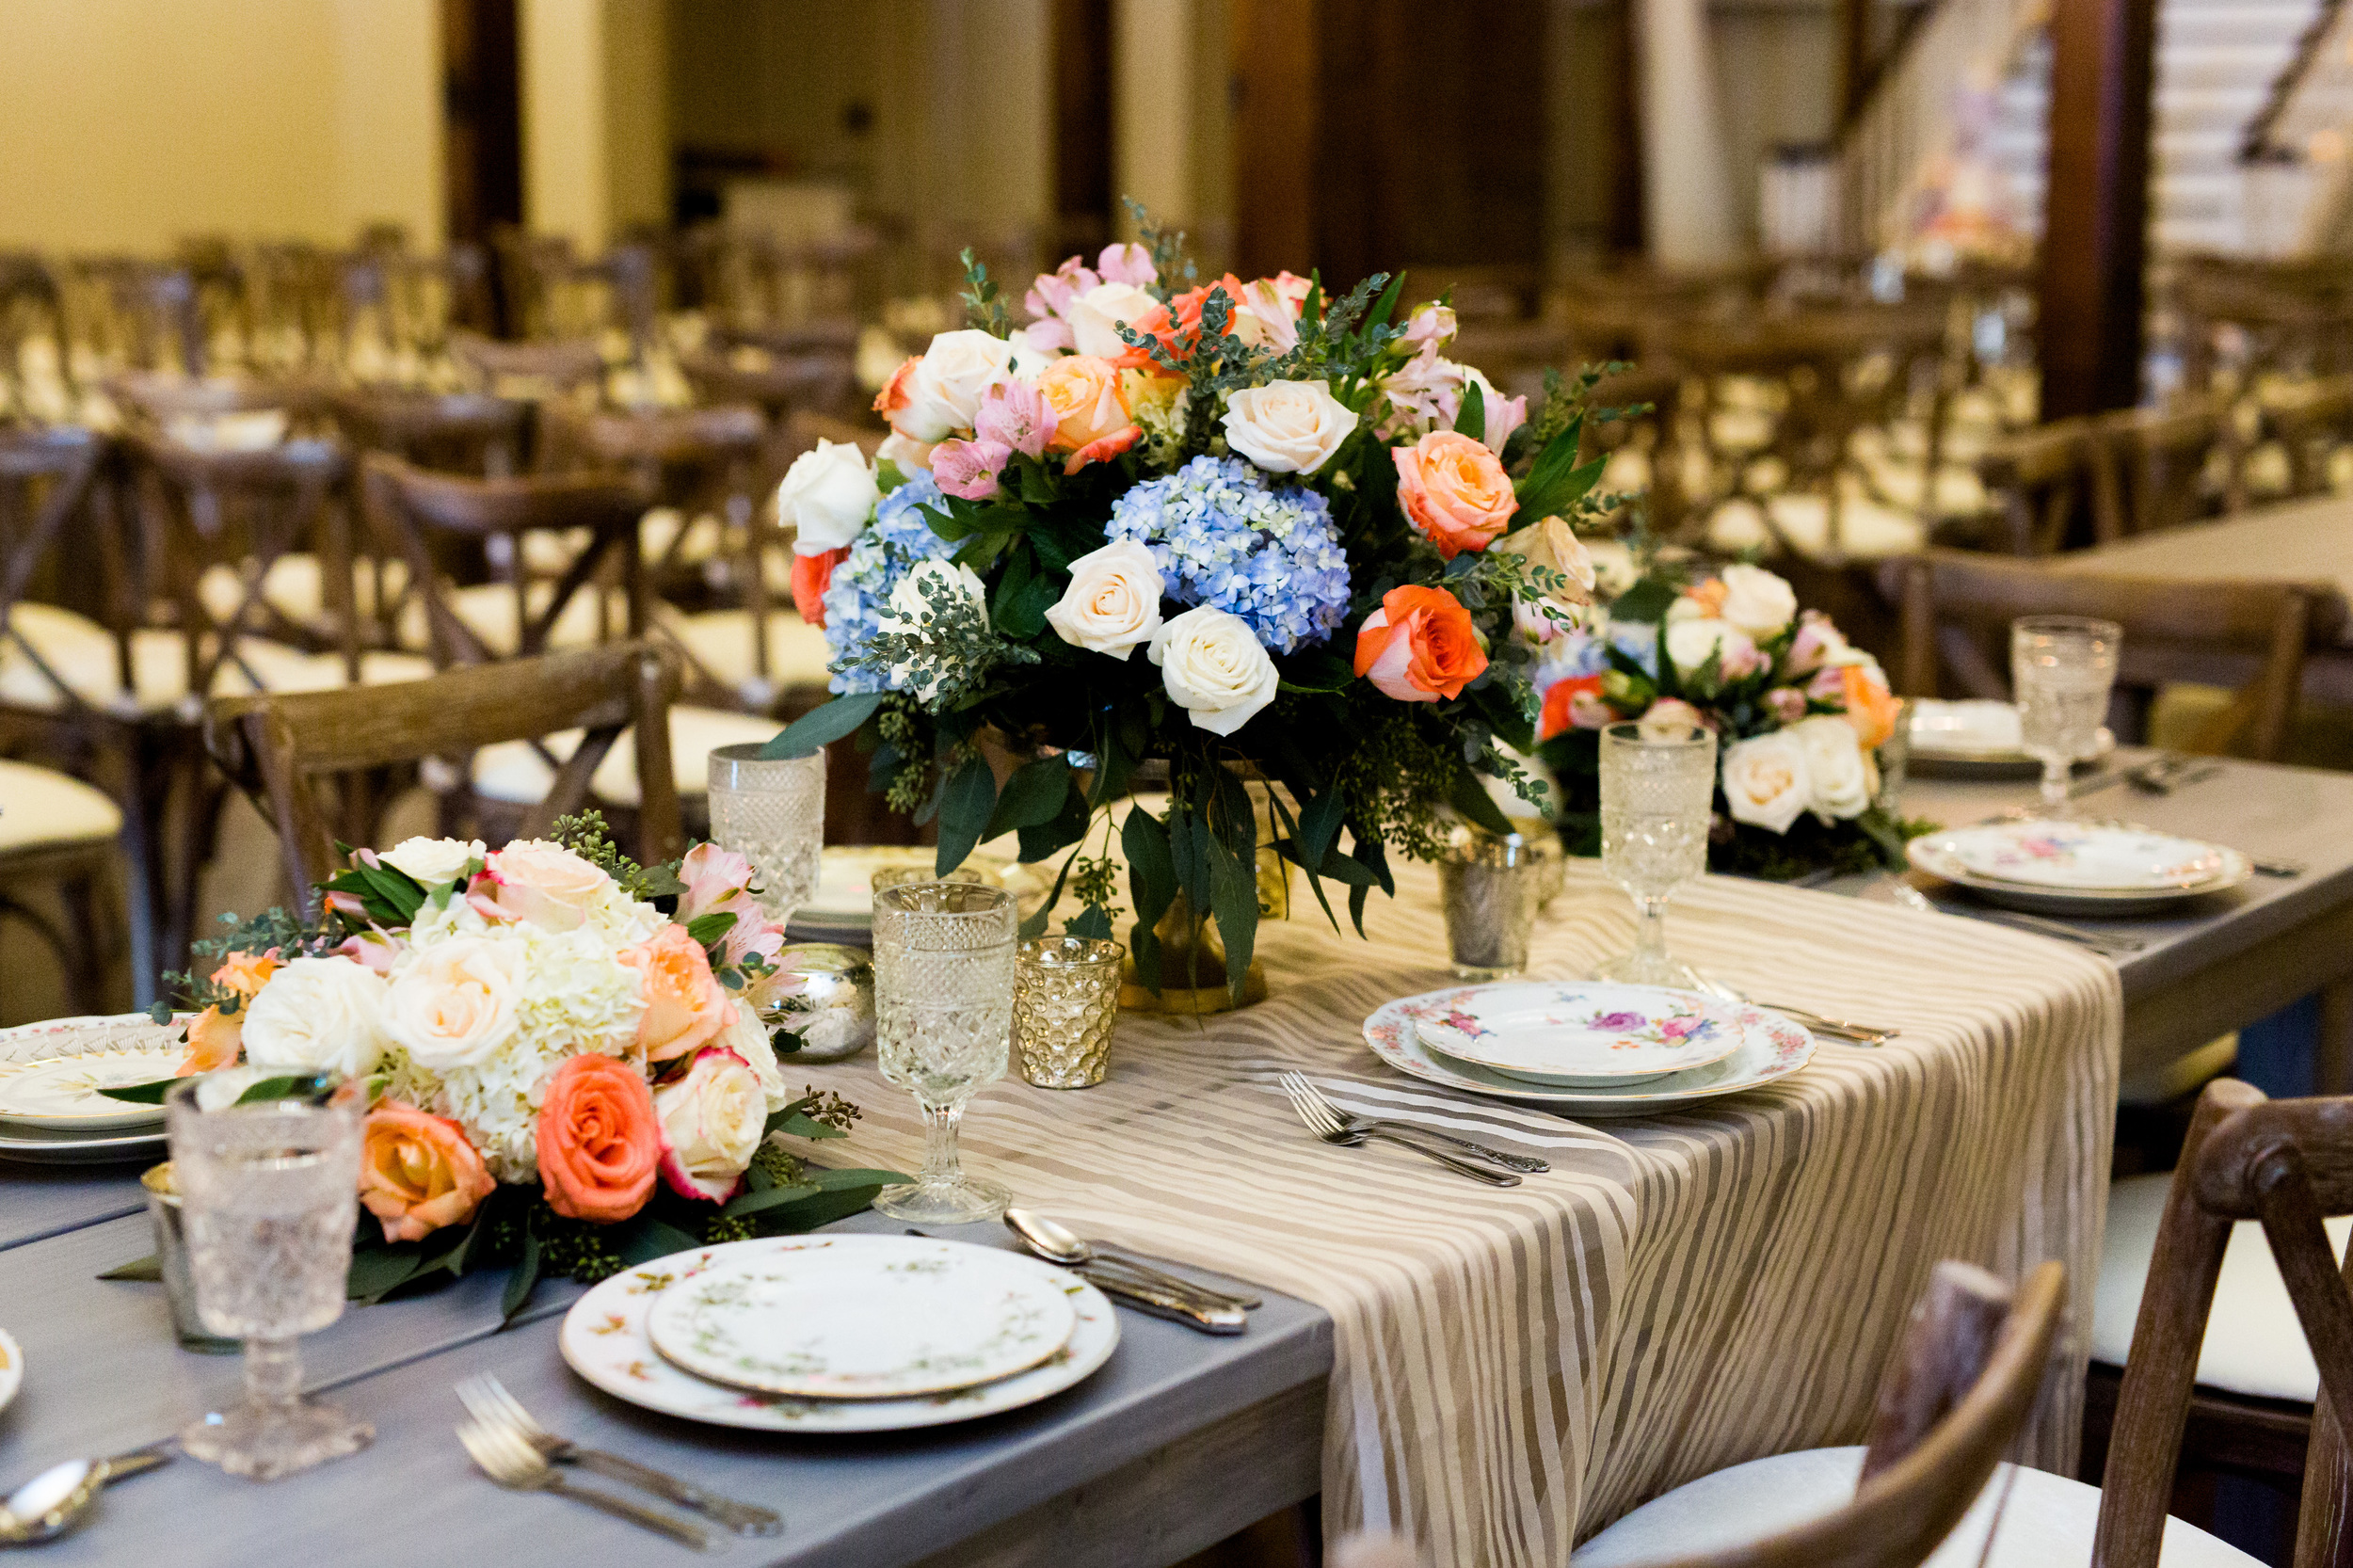 The Grand Canadian Theater OKC Purcell Wedding Venue Ashley Porton Photography Tony Foss Flowers Vintage Tabletop Rental